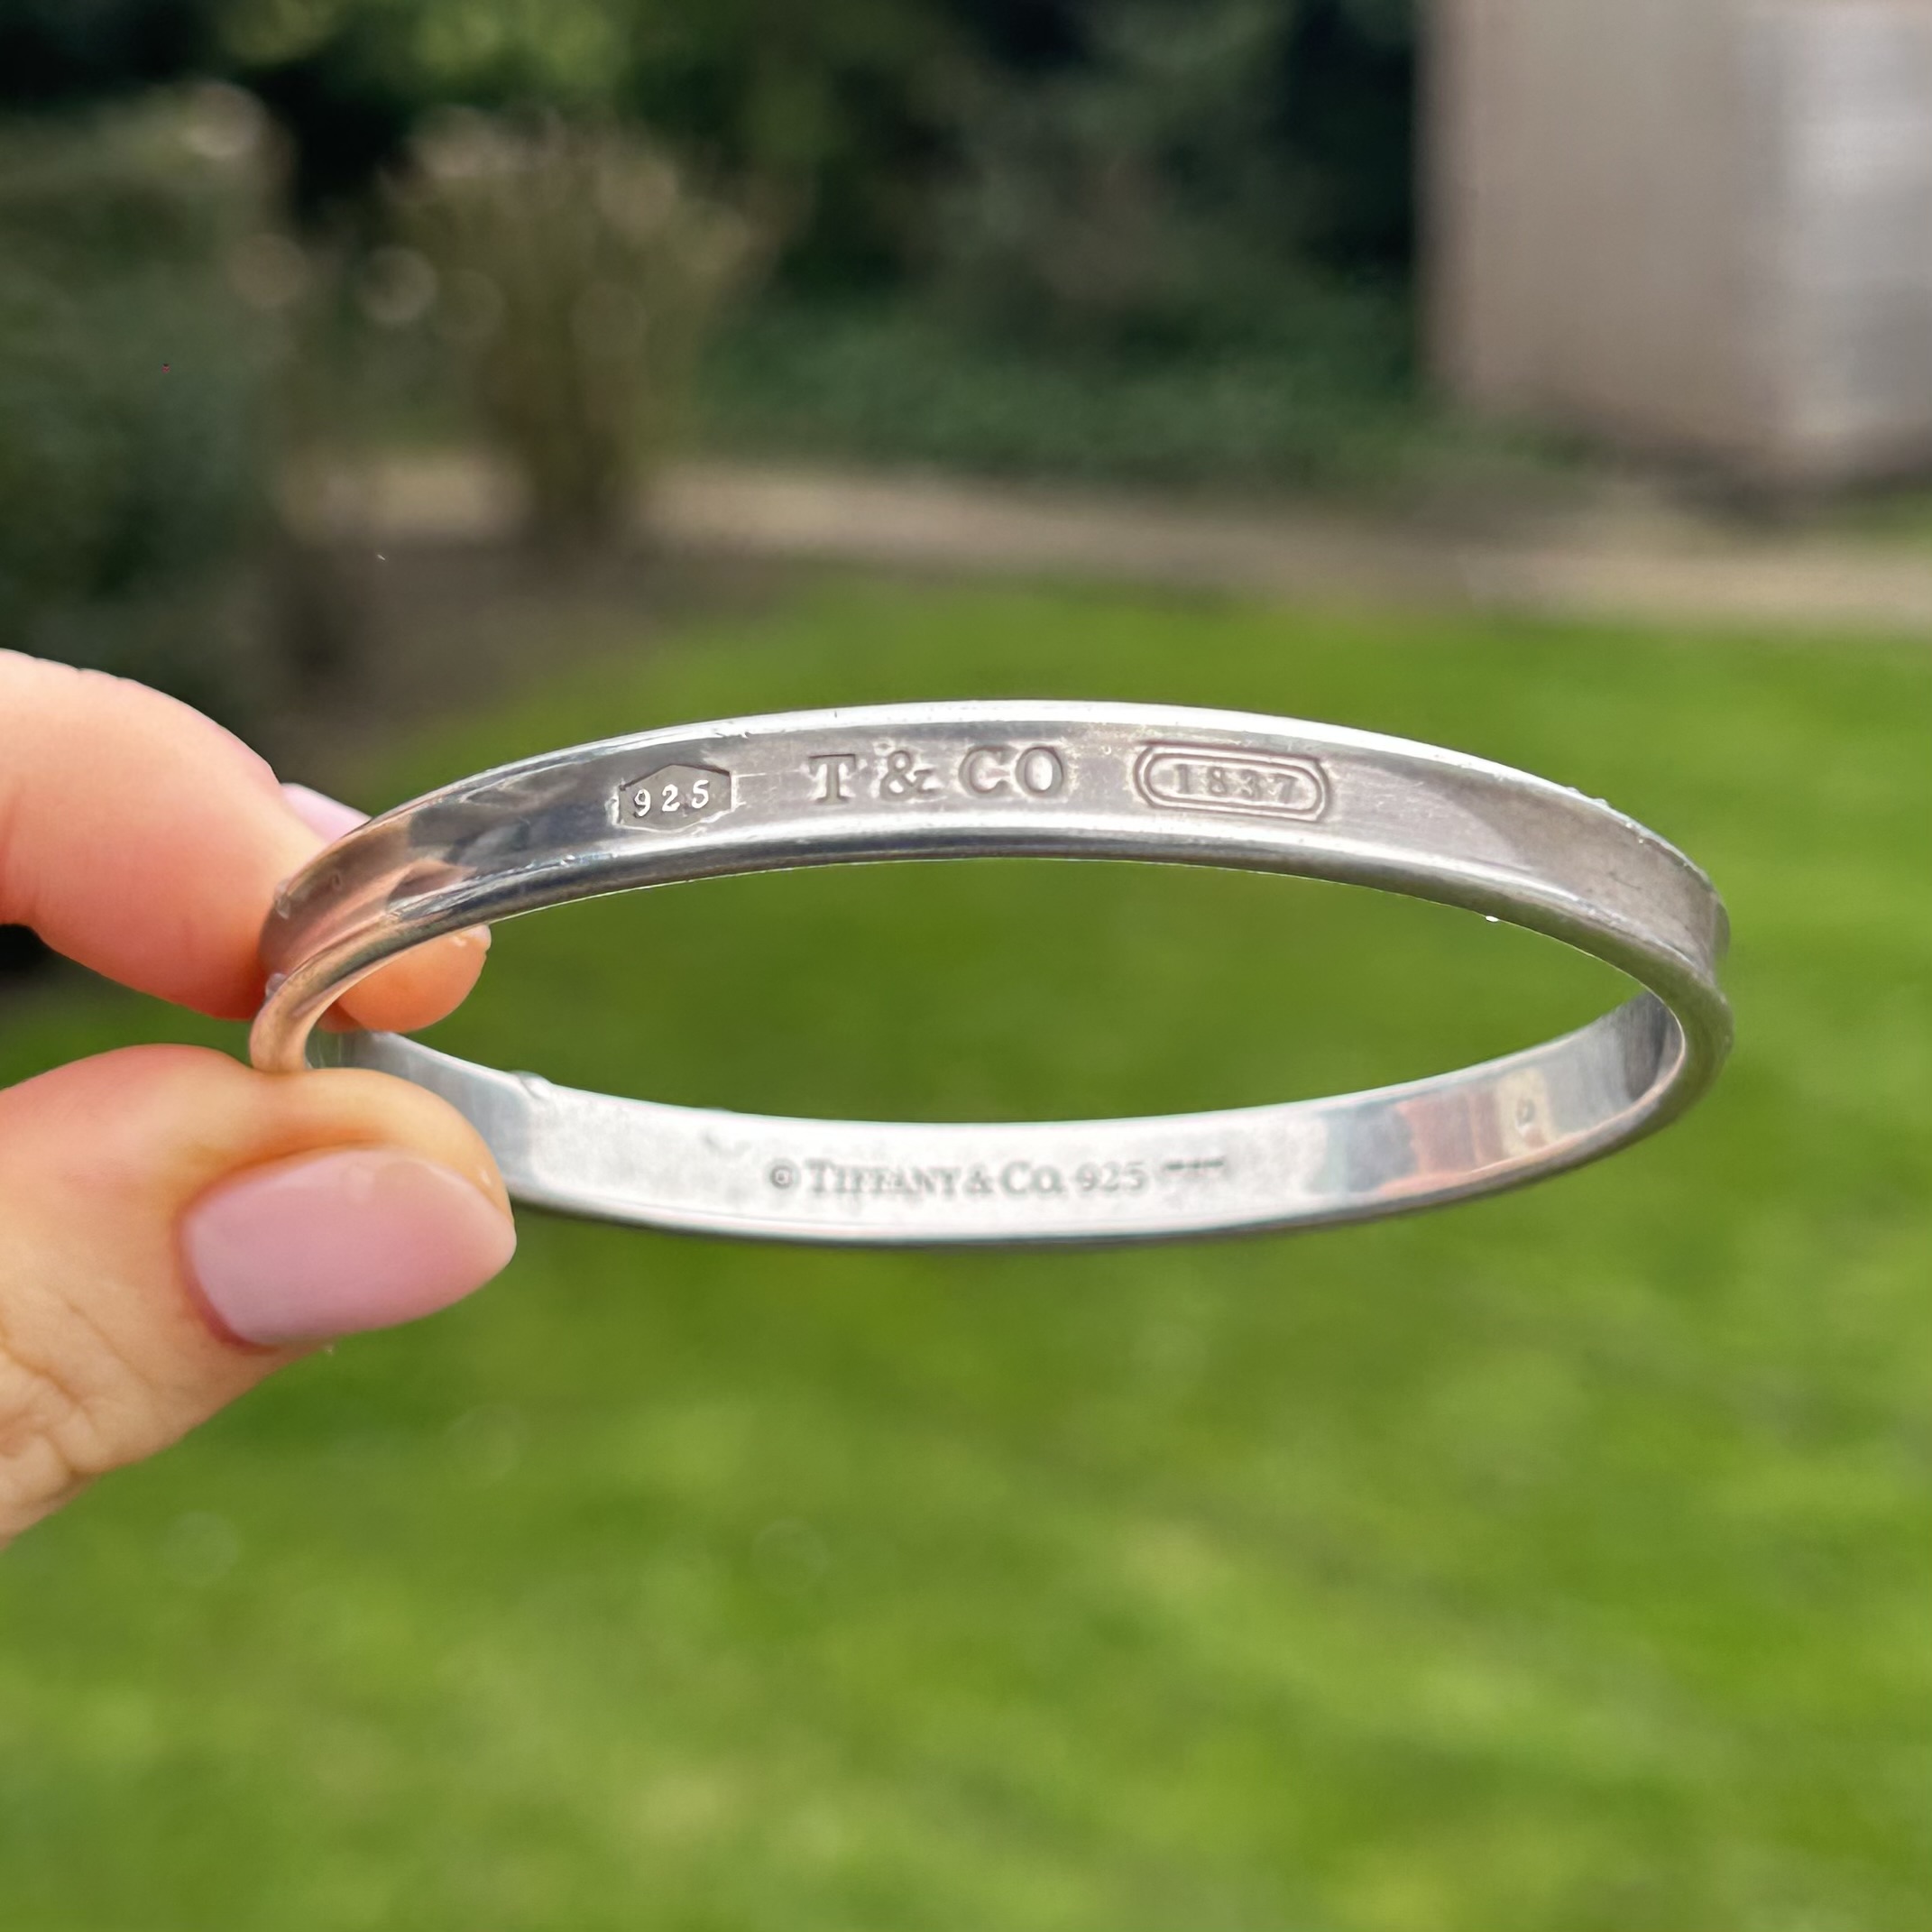 Silver bangle by designer Tiffany & Co (32g) - Image 5 of 12